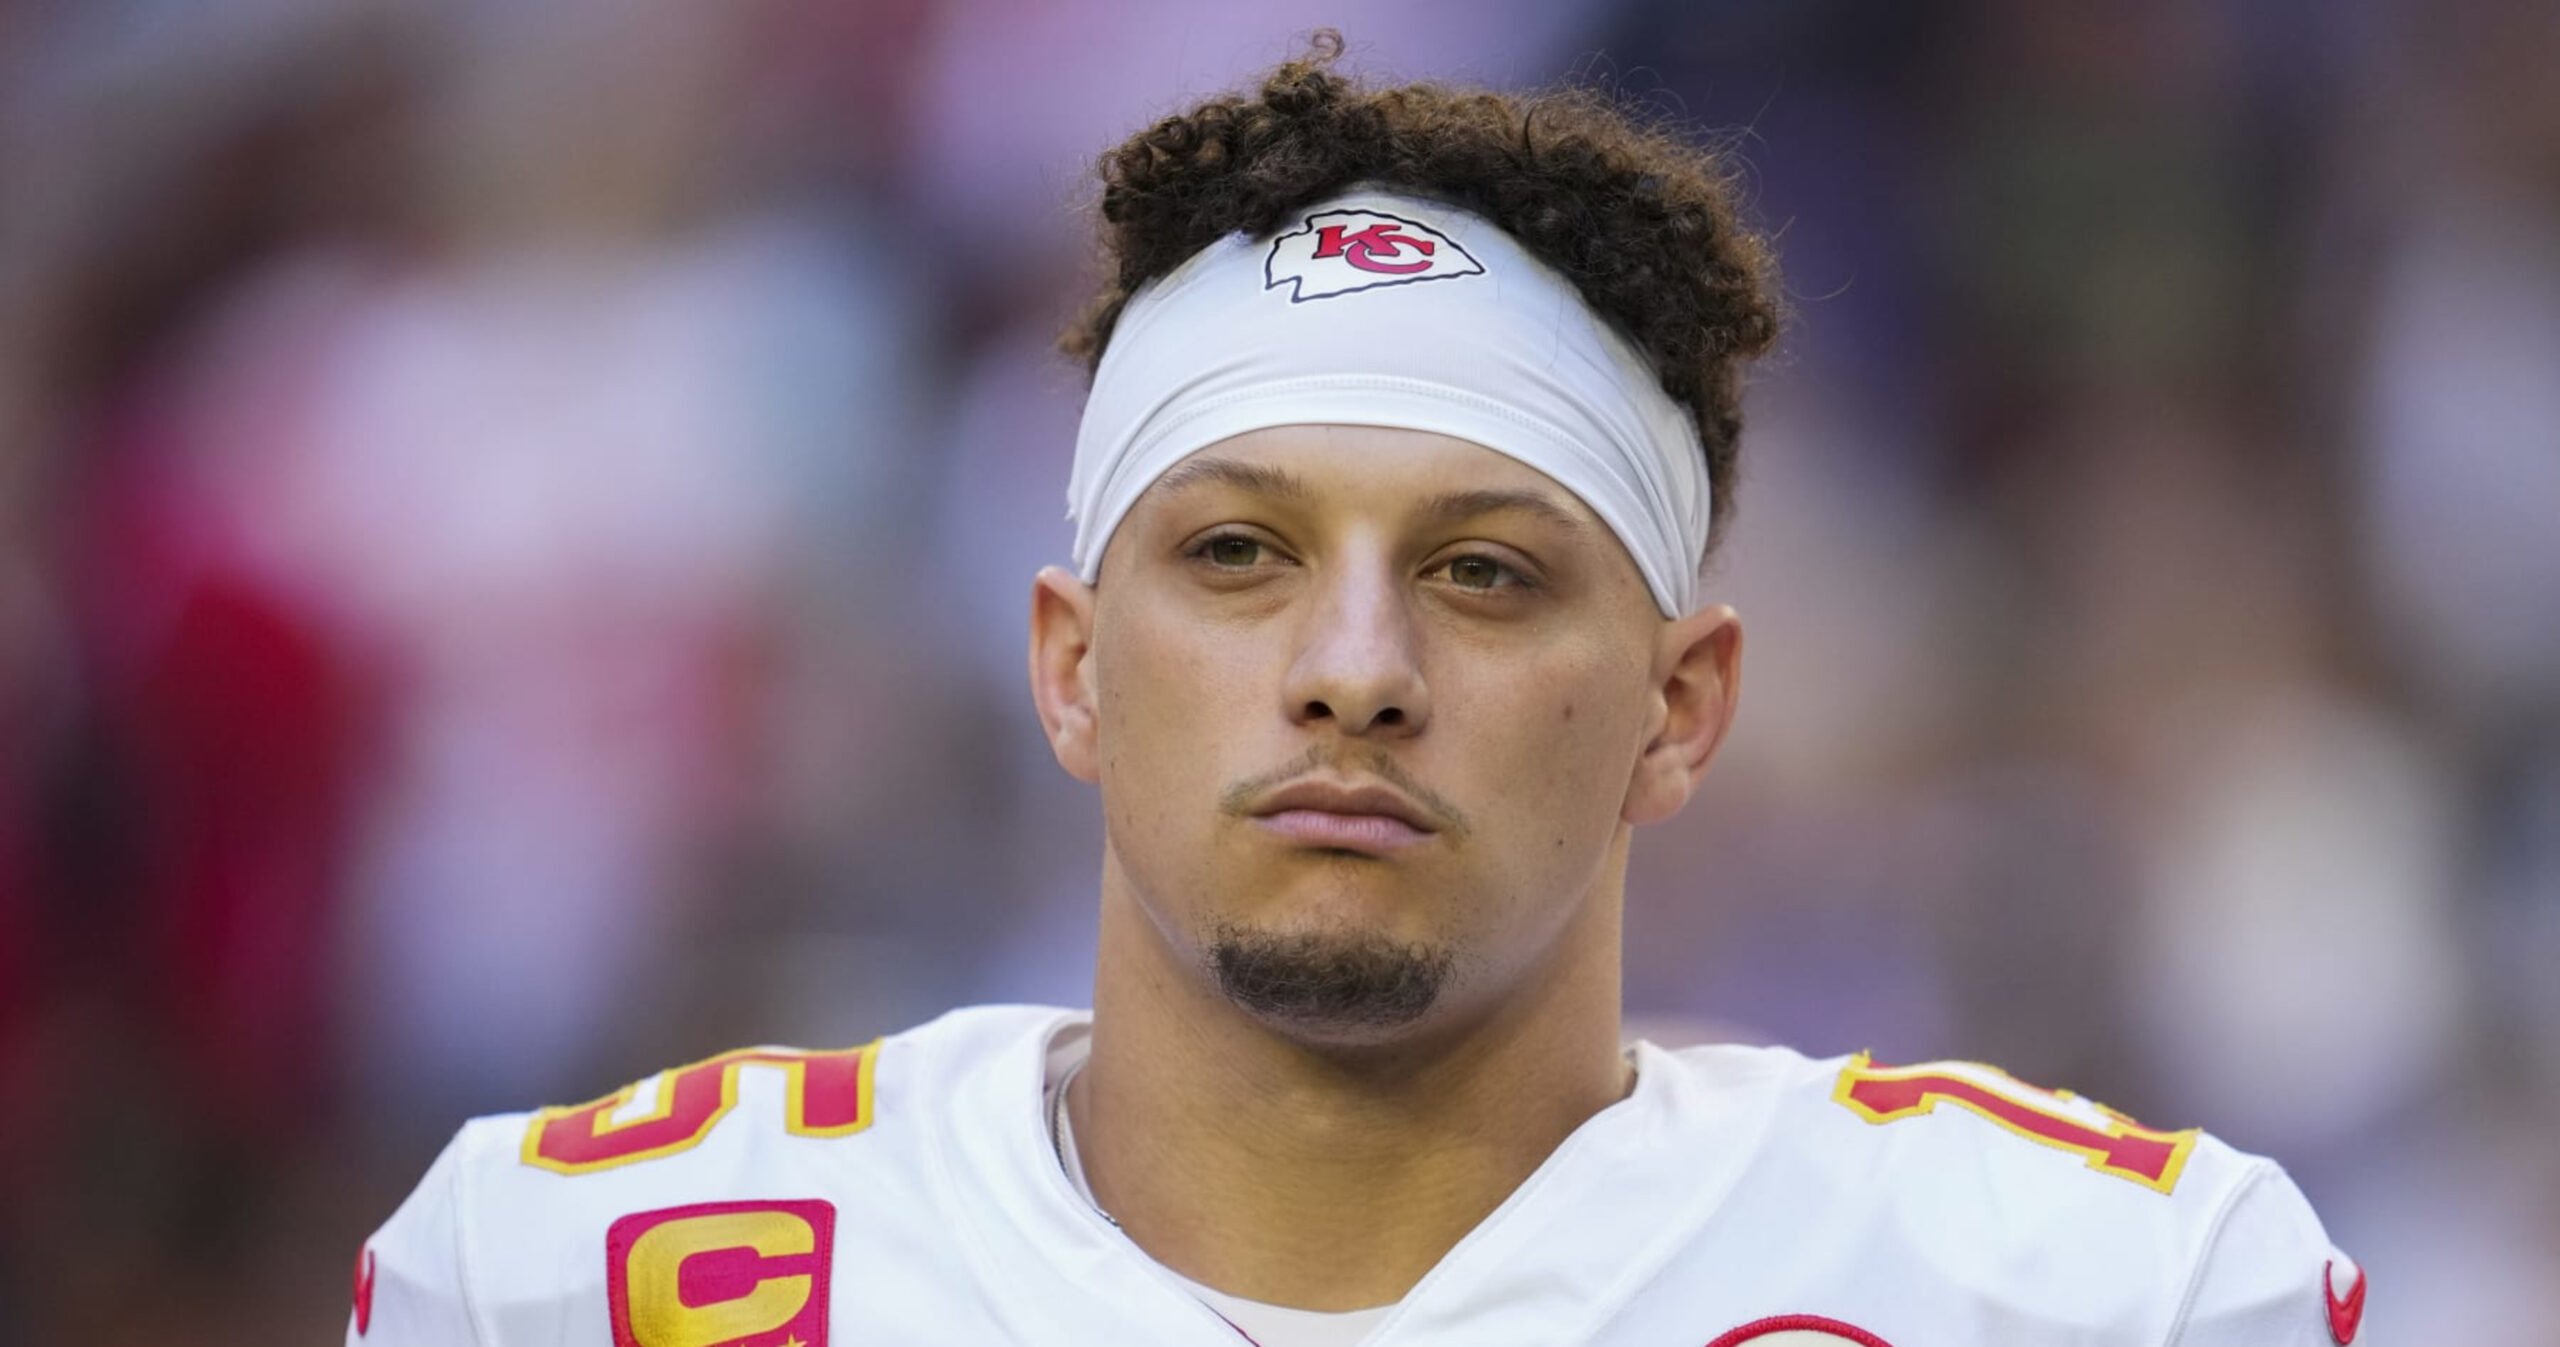 Patrick Mahomes Bio, age, height, ethnicity, family, college, 40 time ...